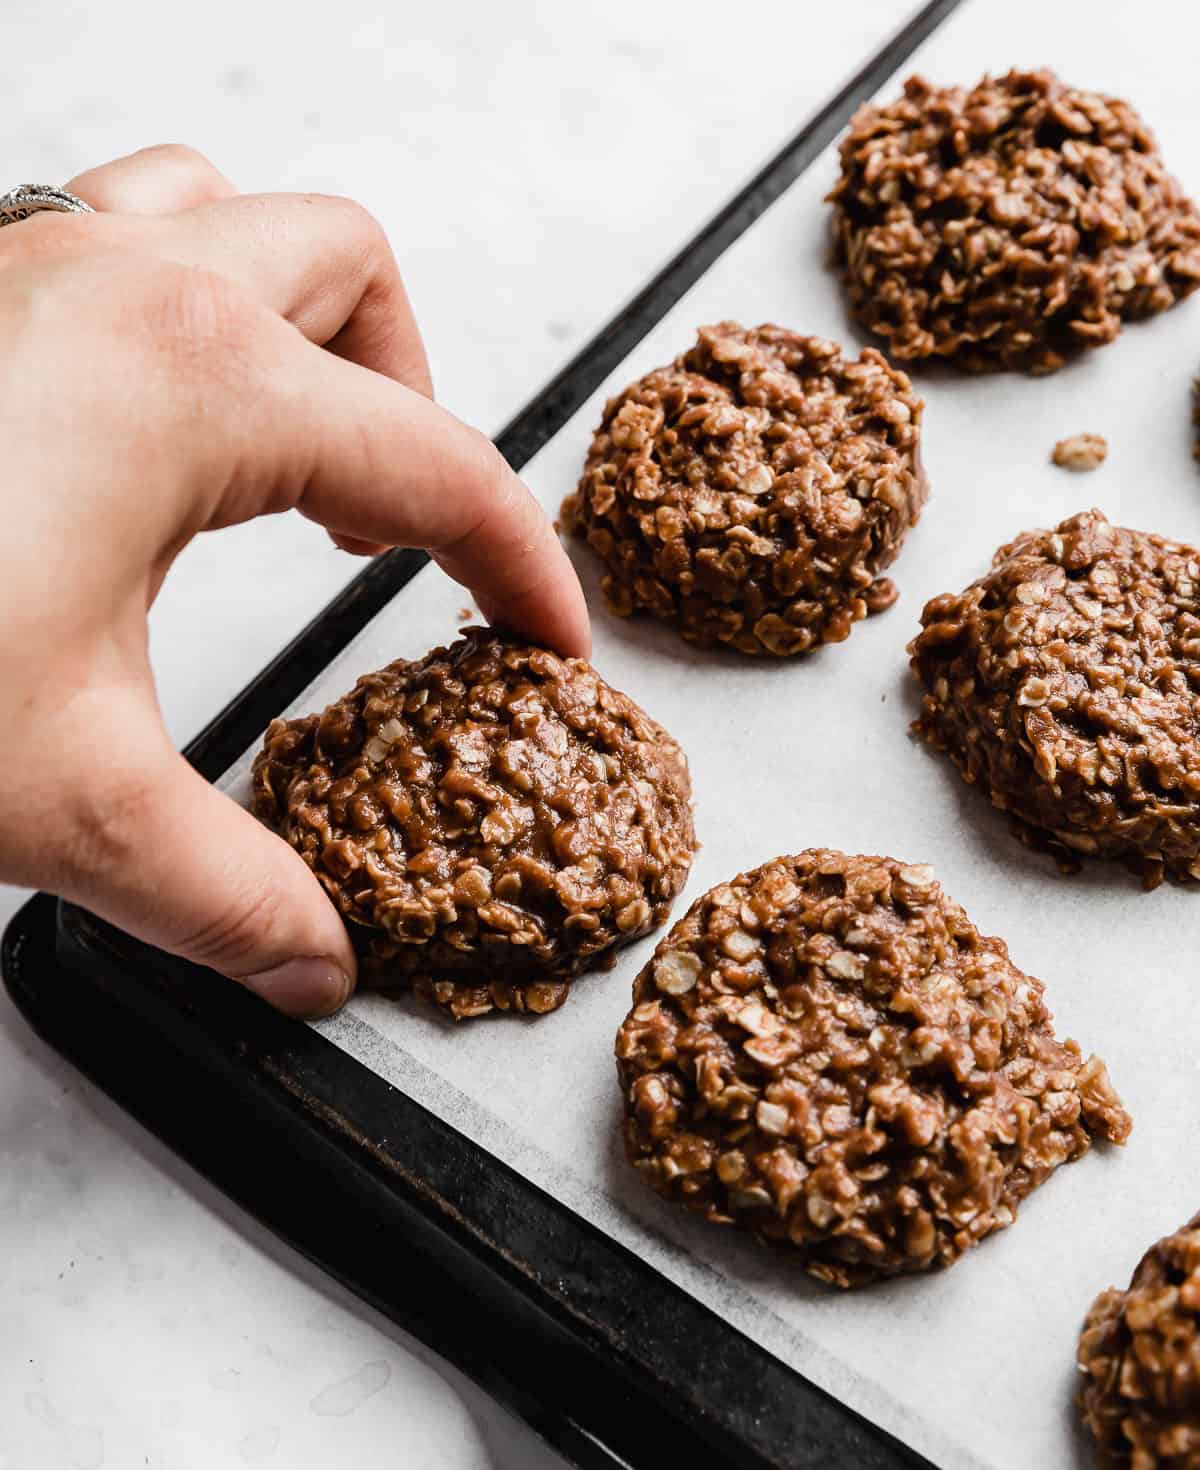 A hand grabbing a Chocolate Peanut Butter No Bake Cookies from a white parchment paper.